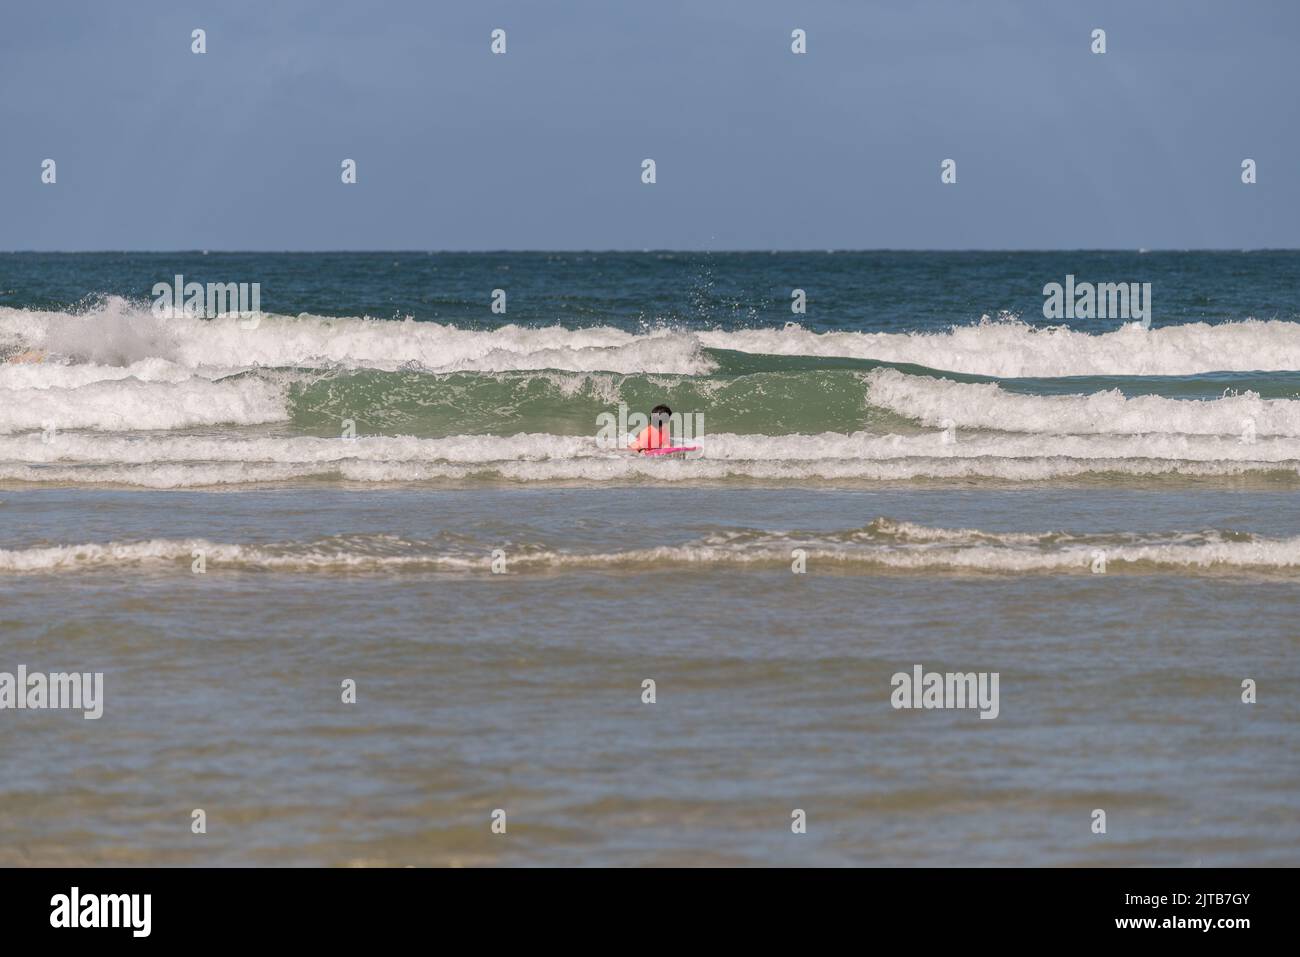 boy with orange equipment and bodyboard practices in the waves of Aveiro beach Stock Photo